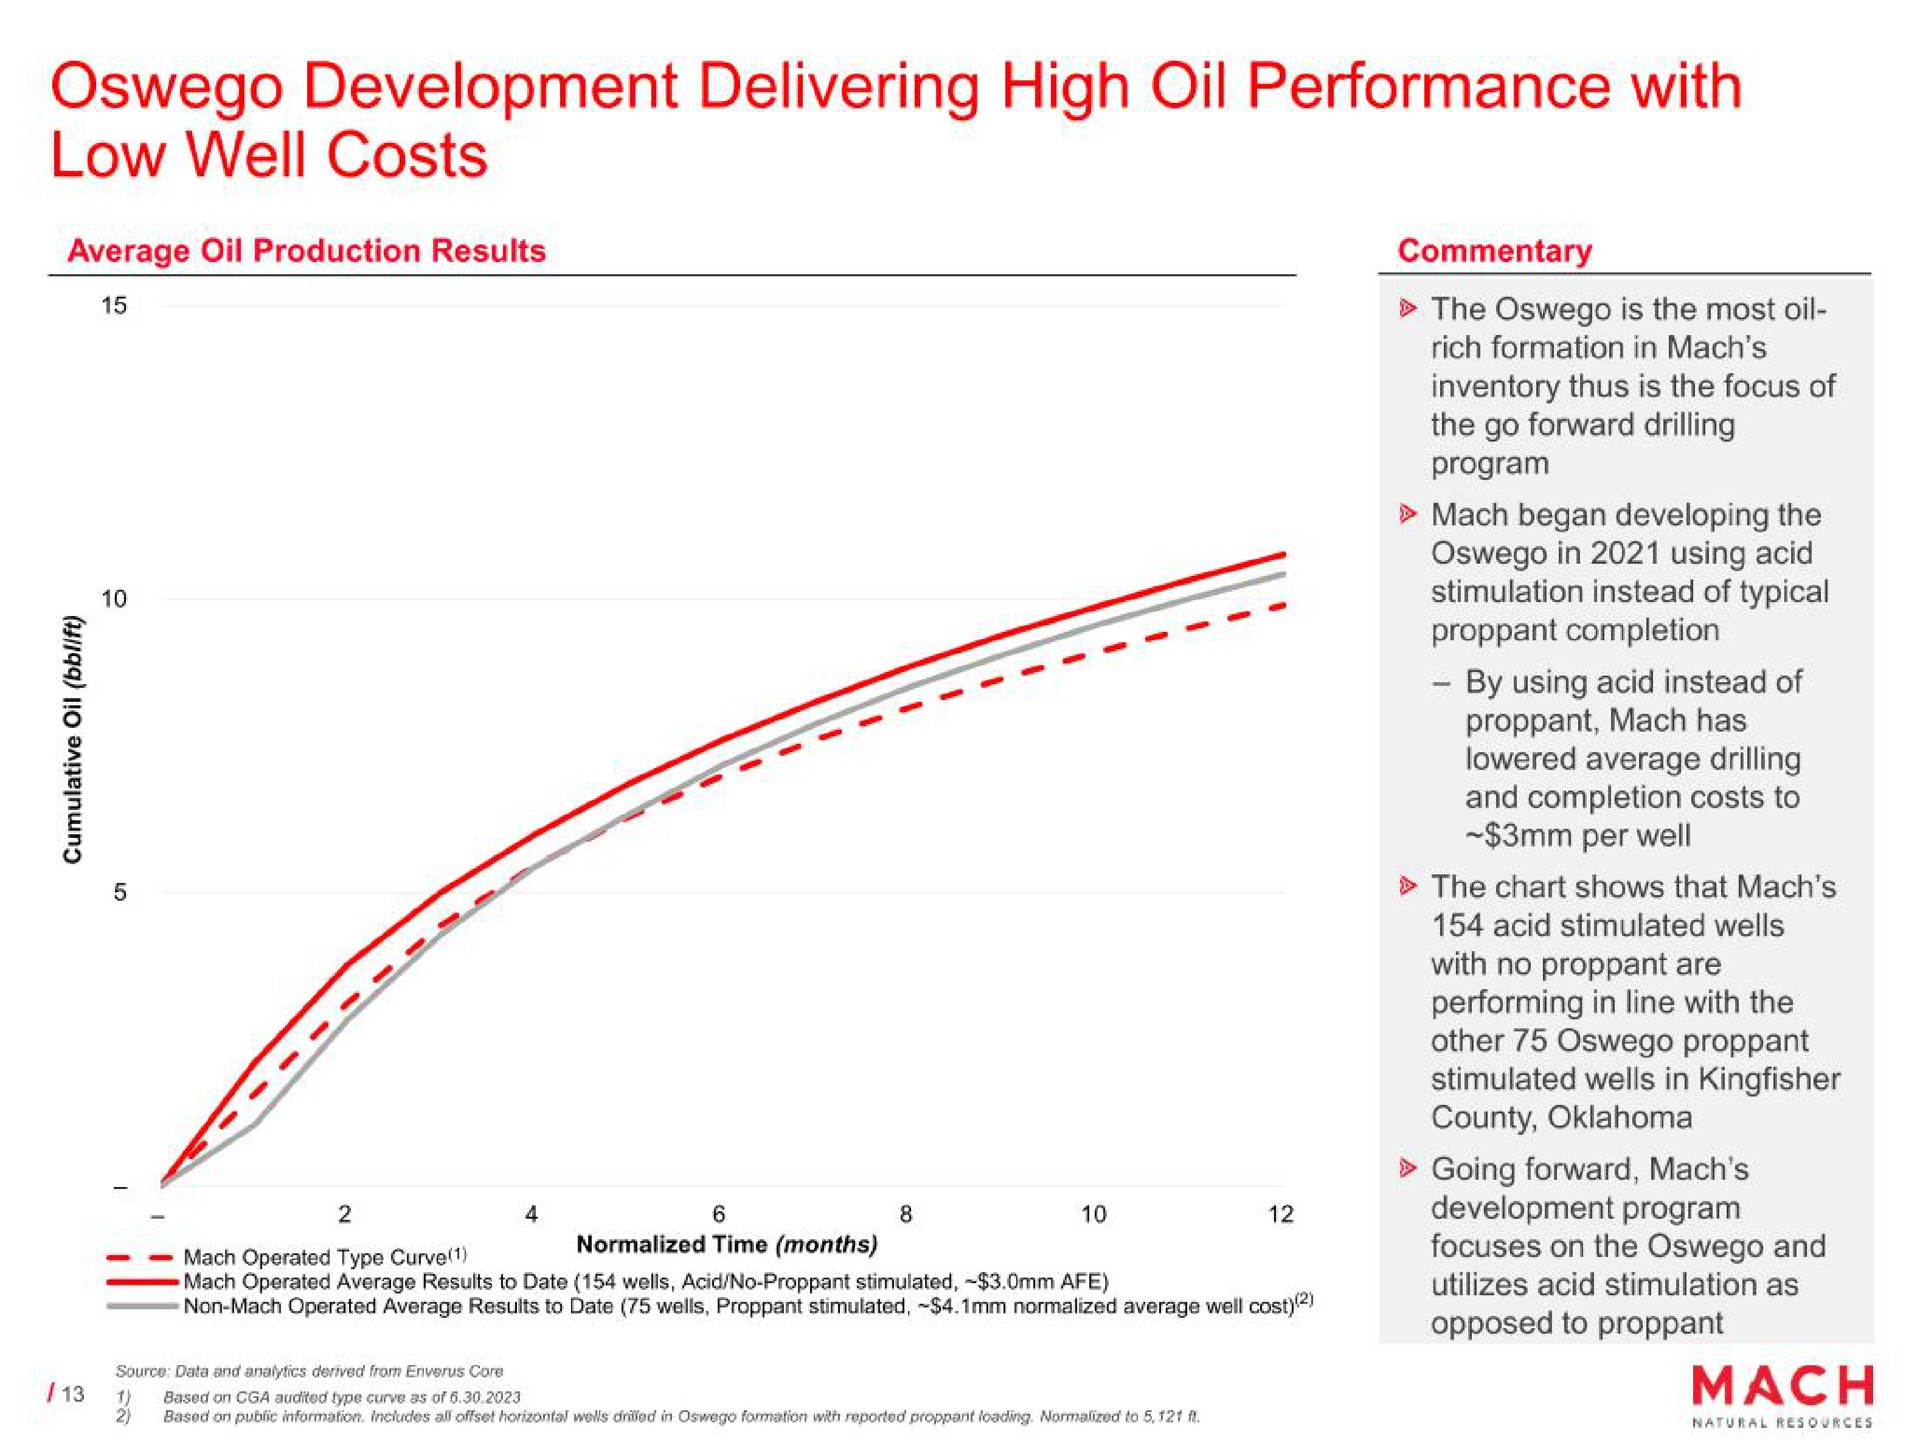 development delivering high oil performance with low well costs | Mach Natural Resources